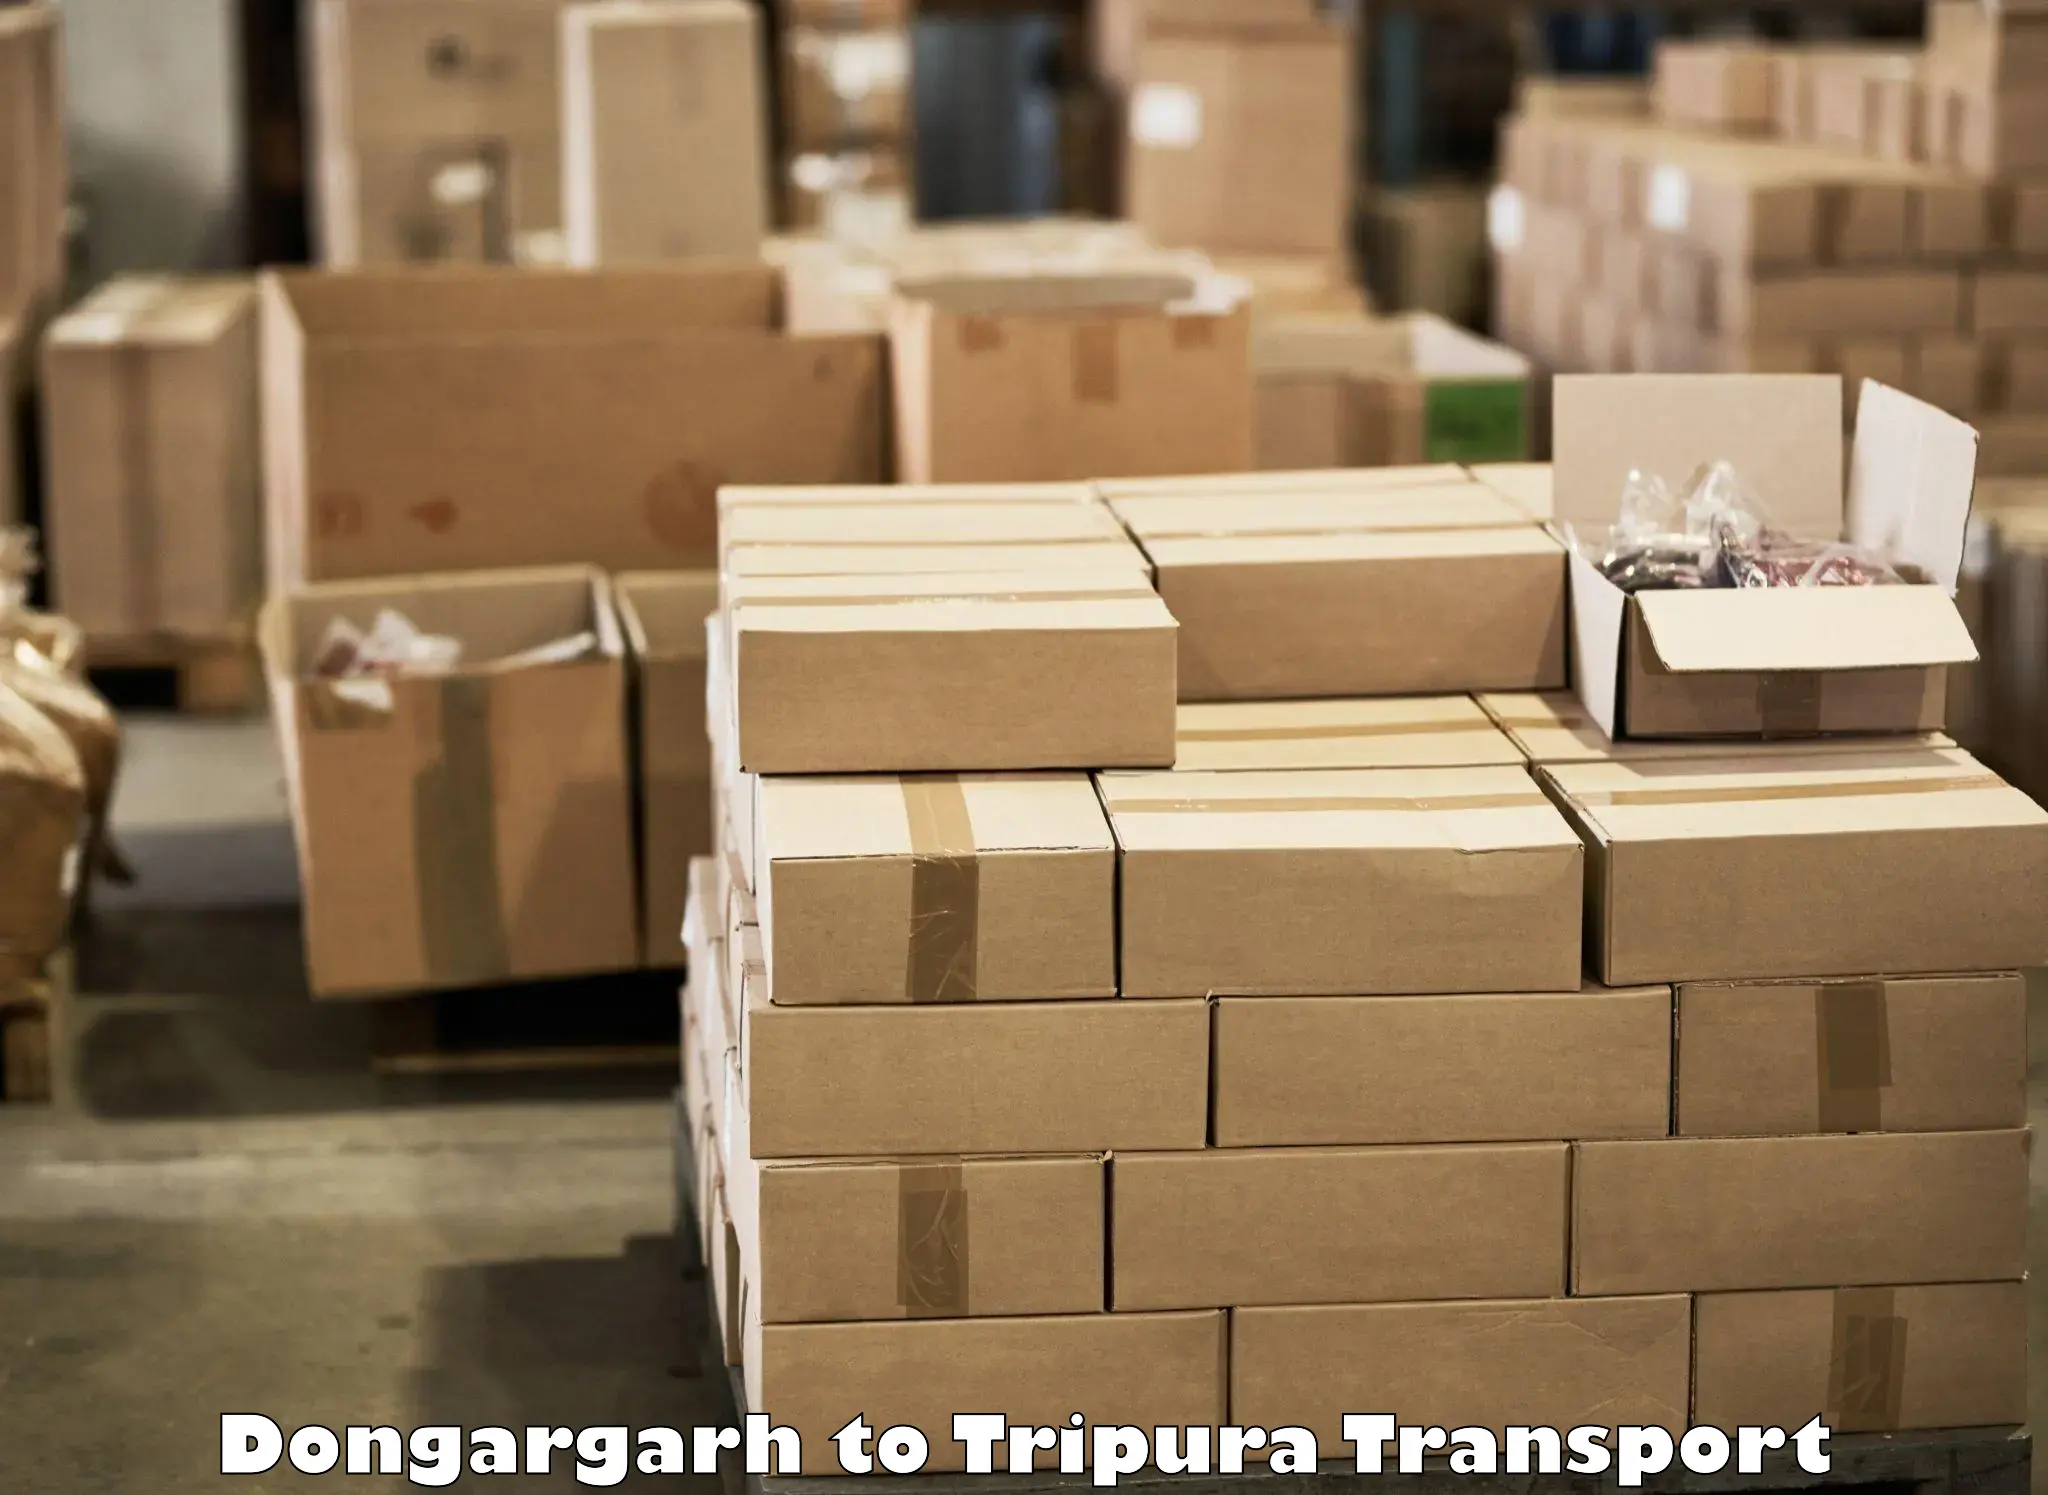 Container transport service Dongargarh to Dharmanagar